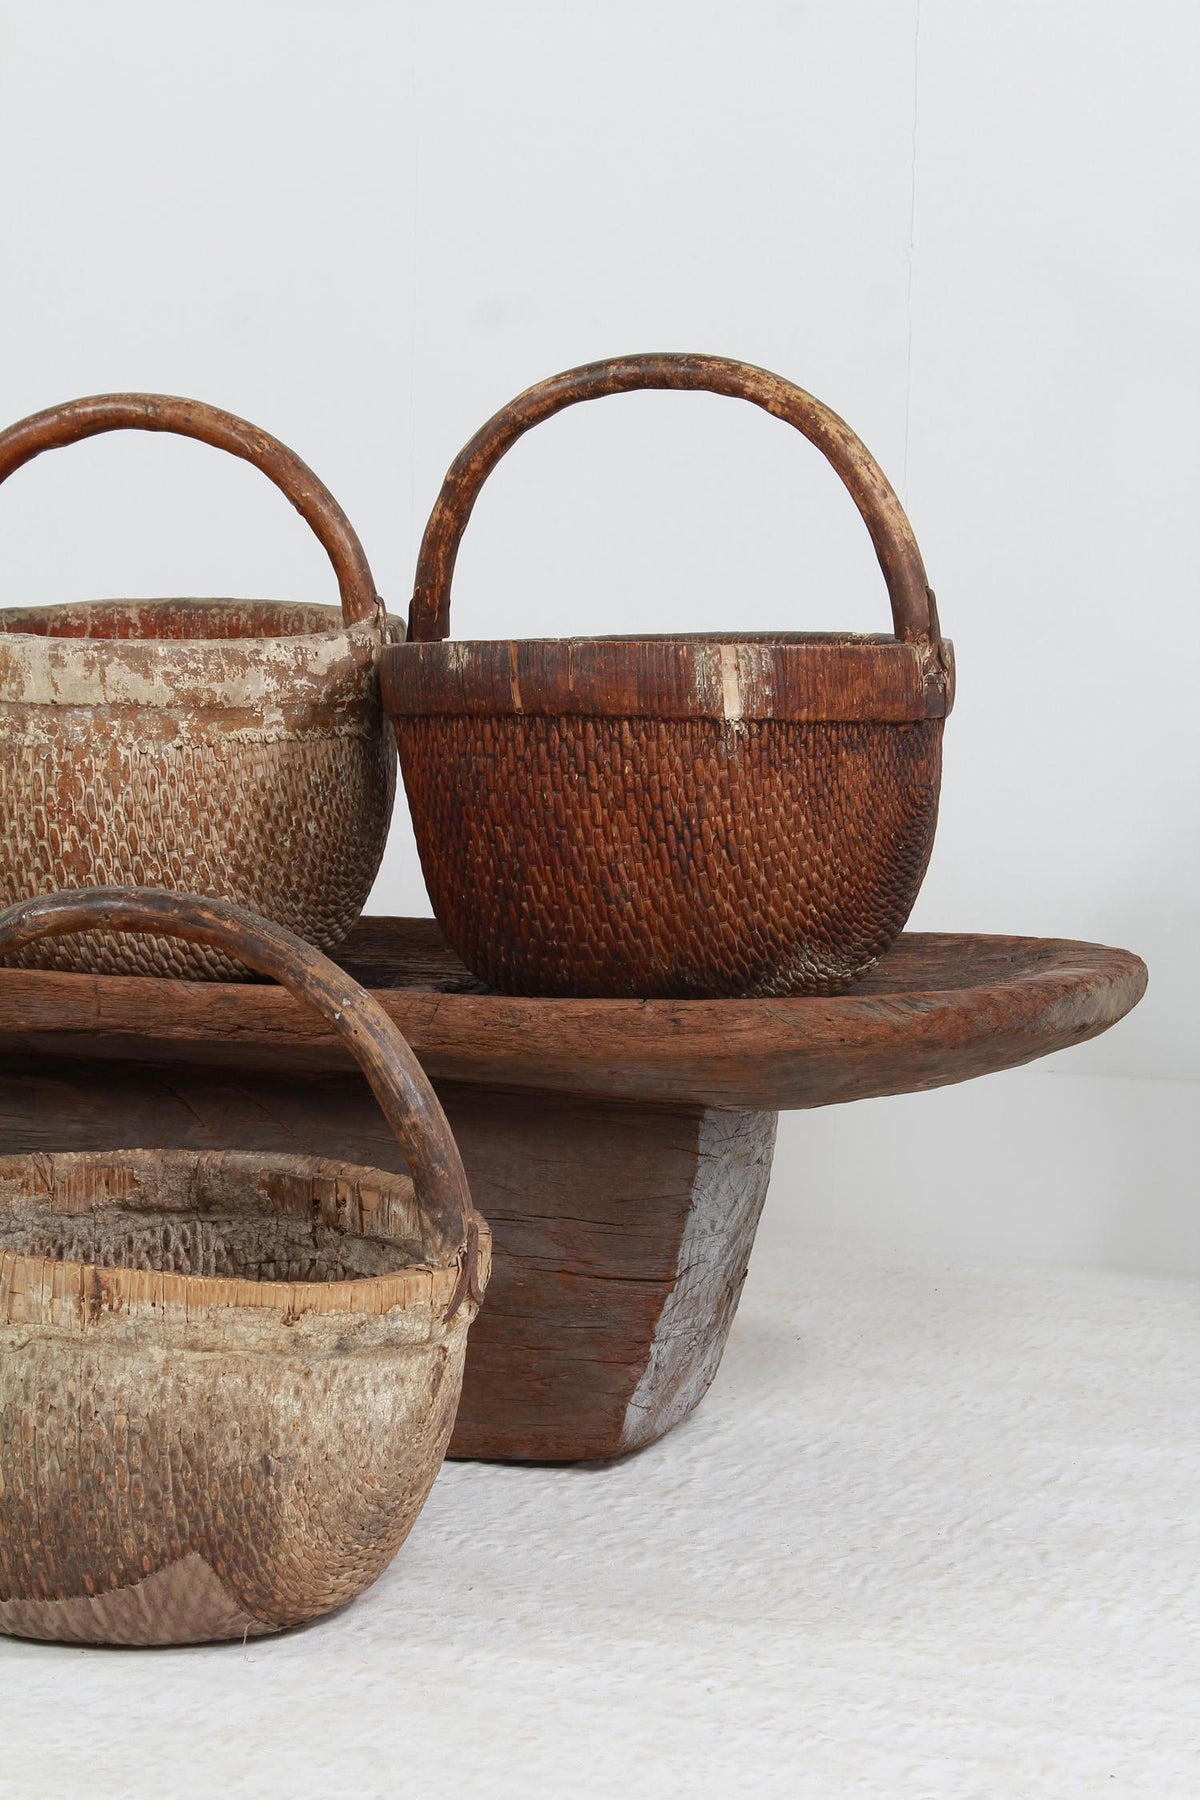 WONDERFUL RUSTIC ANTIQUE WOVEN RICE BASKETS WITH TREE BRANCH HANDLES